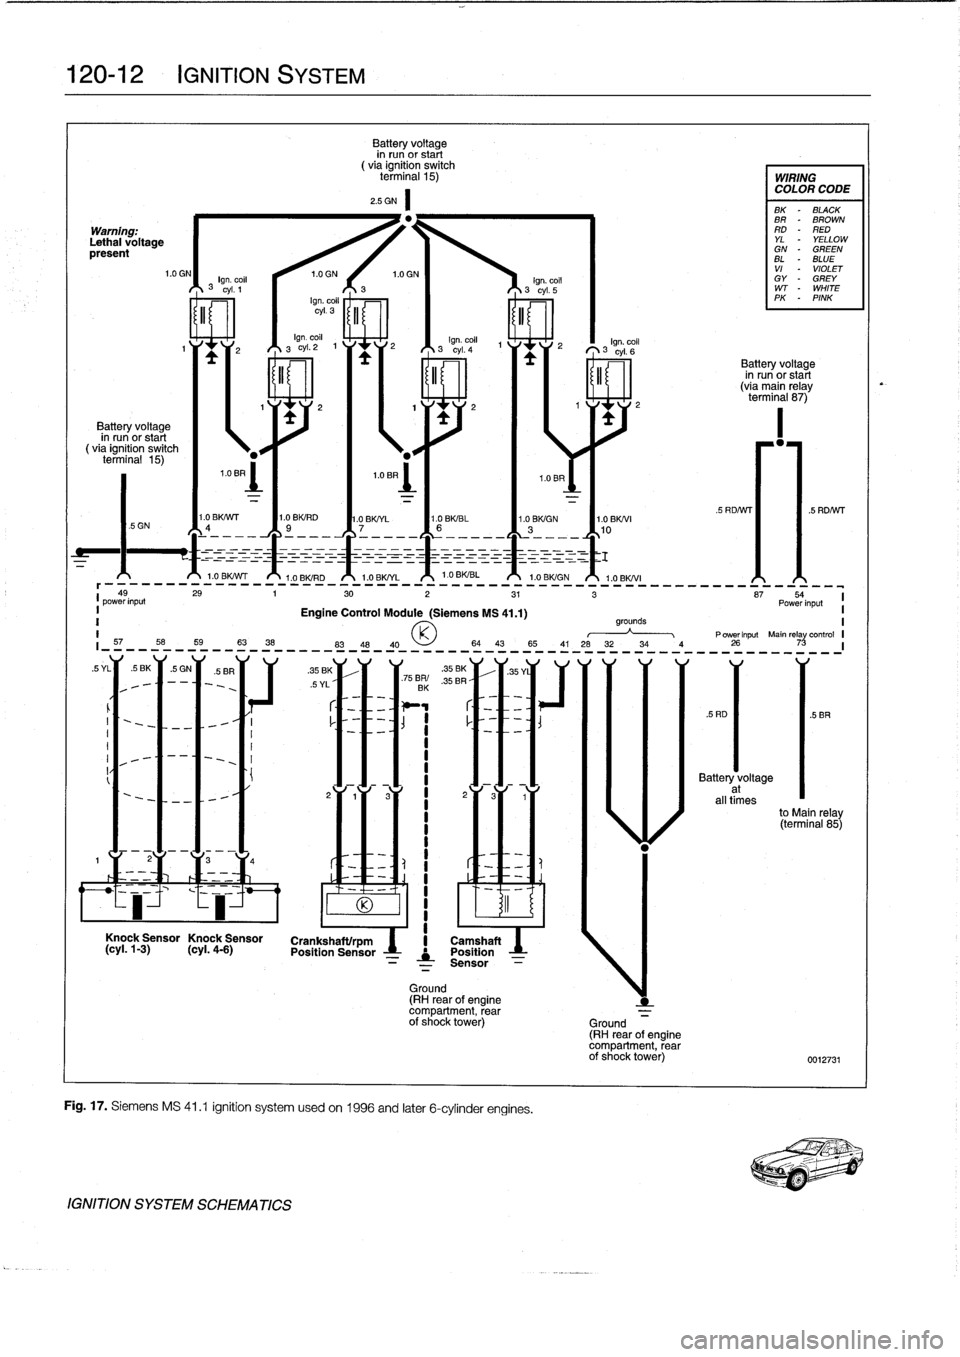 BMW 325i 1994 E36 Repair Manual 
120-12

	

IGNITION
SYSTEM

Warning
.
Lethal
voltagepresent

Battery
voltage
in
run
or
start
(via
ignitíon
switch
terminal
15)

I
t

IGNITION
SYSTEM
SCHEMATICS

Battery
voltage
in
run
or
start
(
via